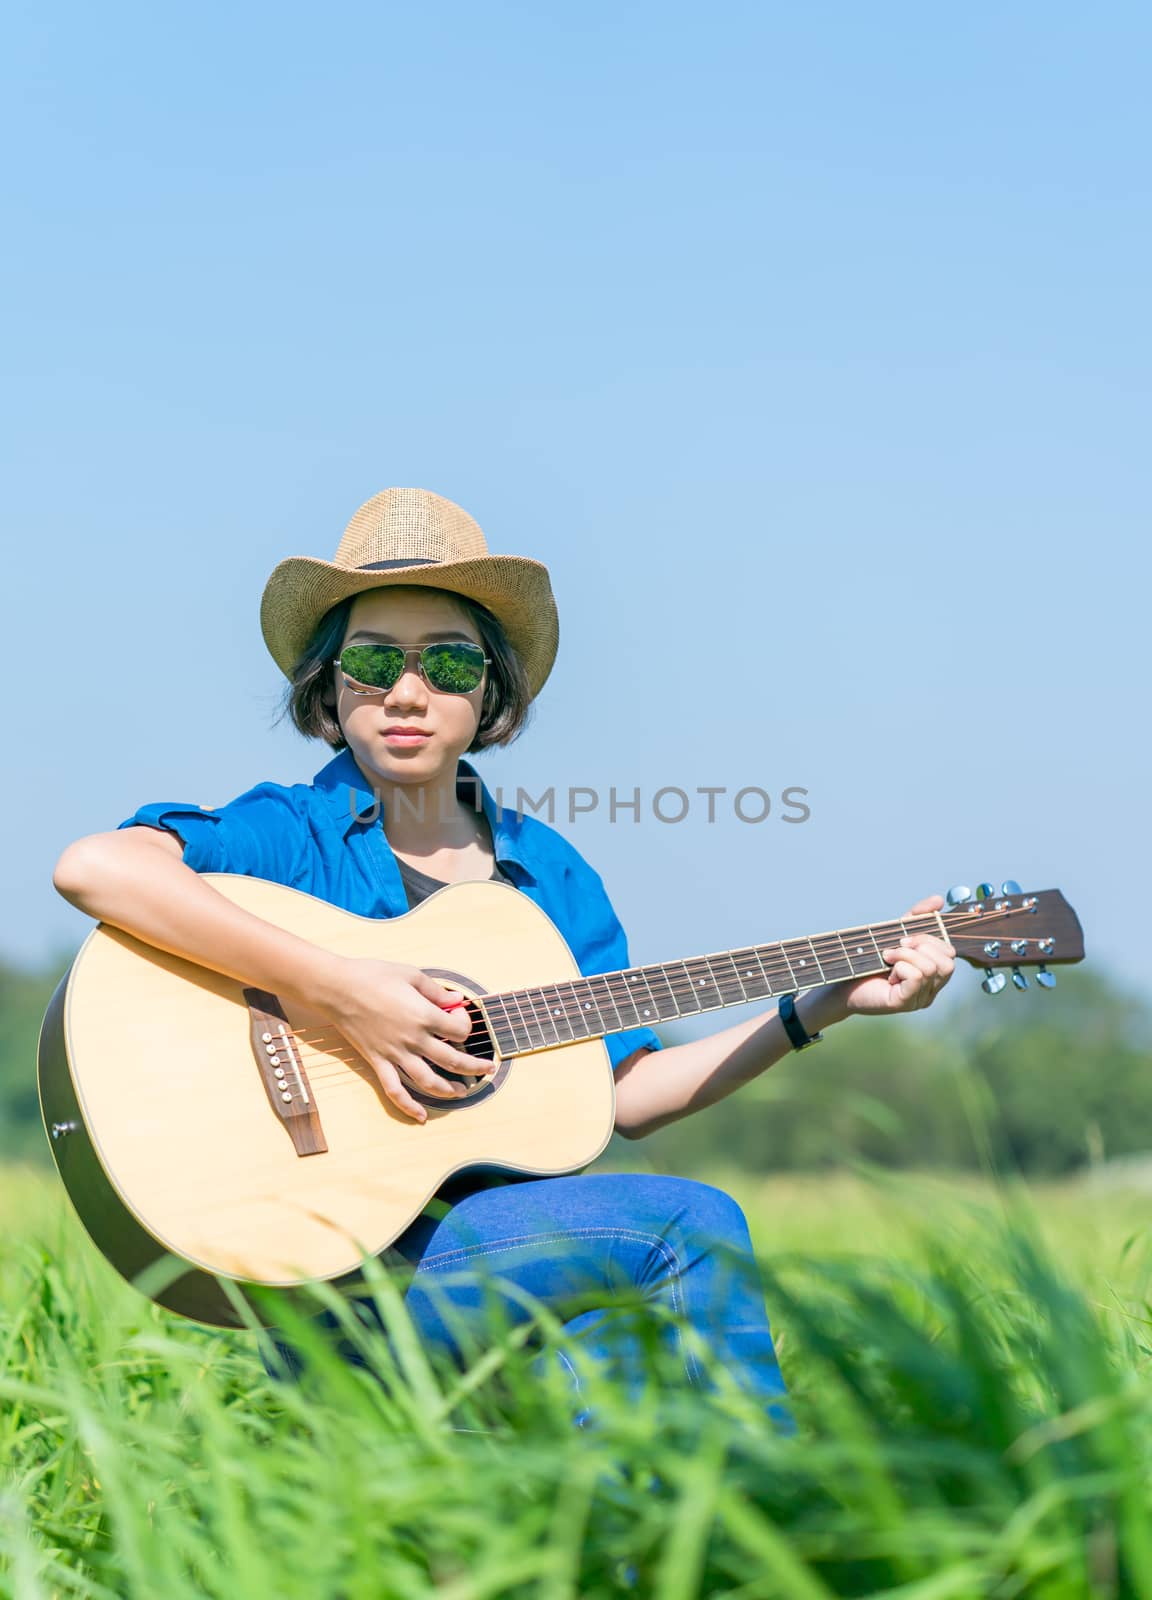 Women short hair wear hat and sunglasses sit playing guitar in g by stoonn